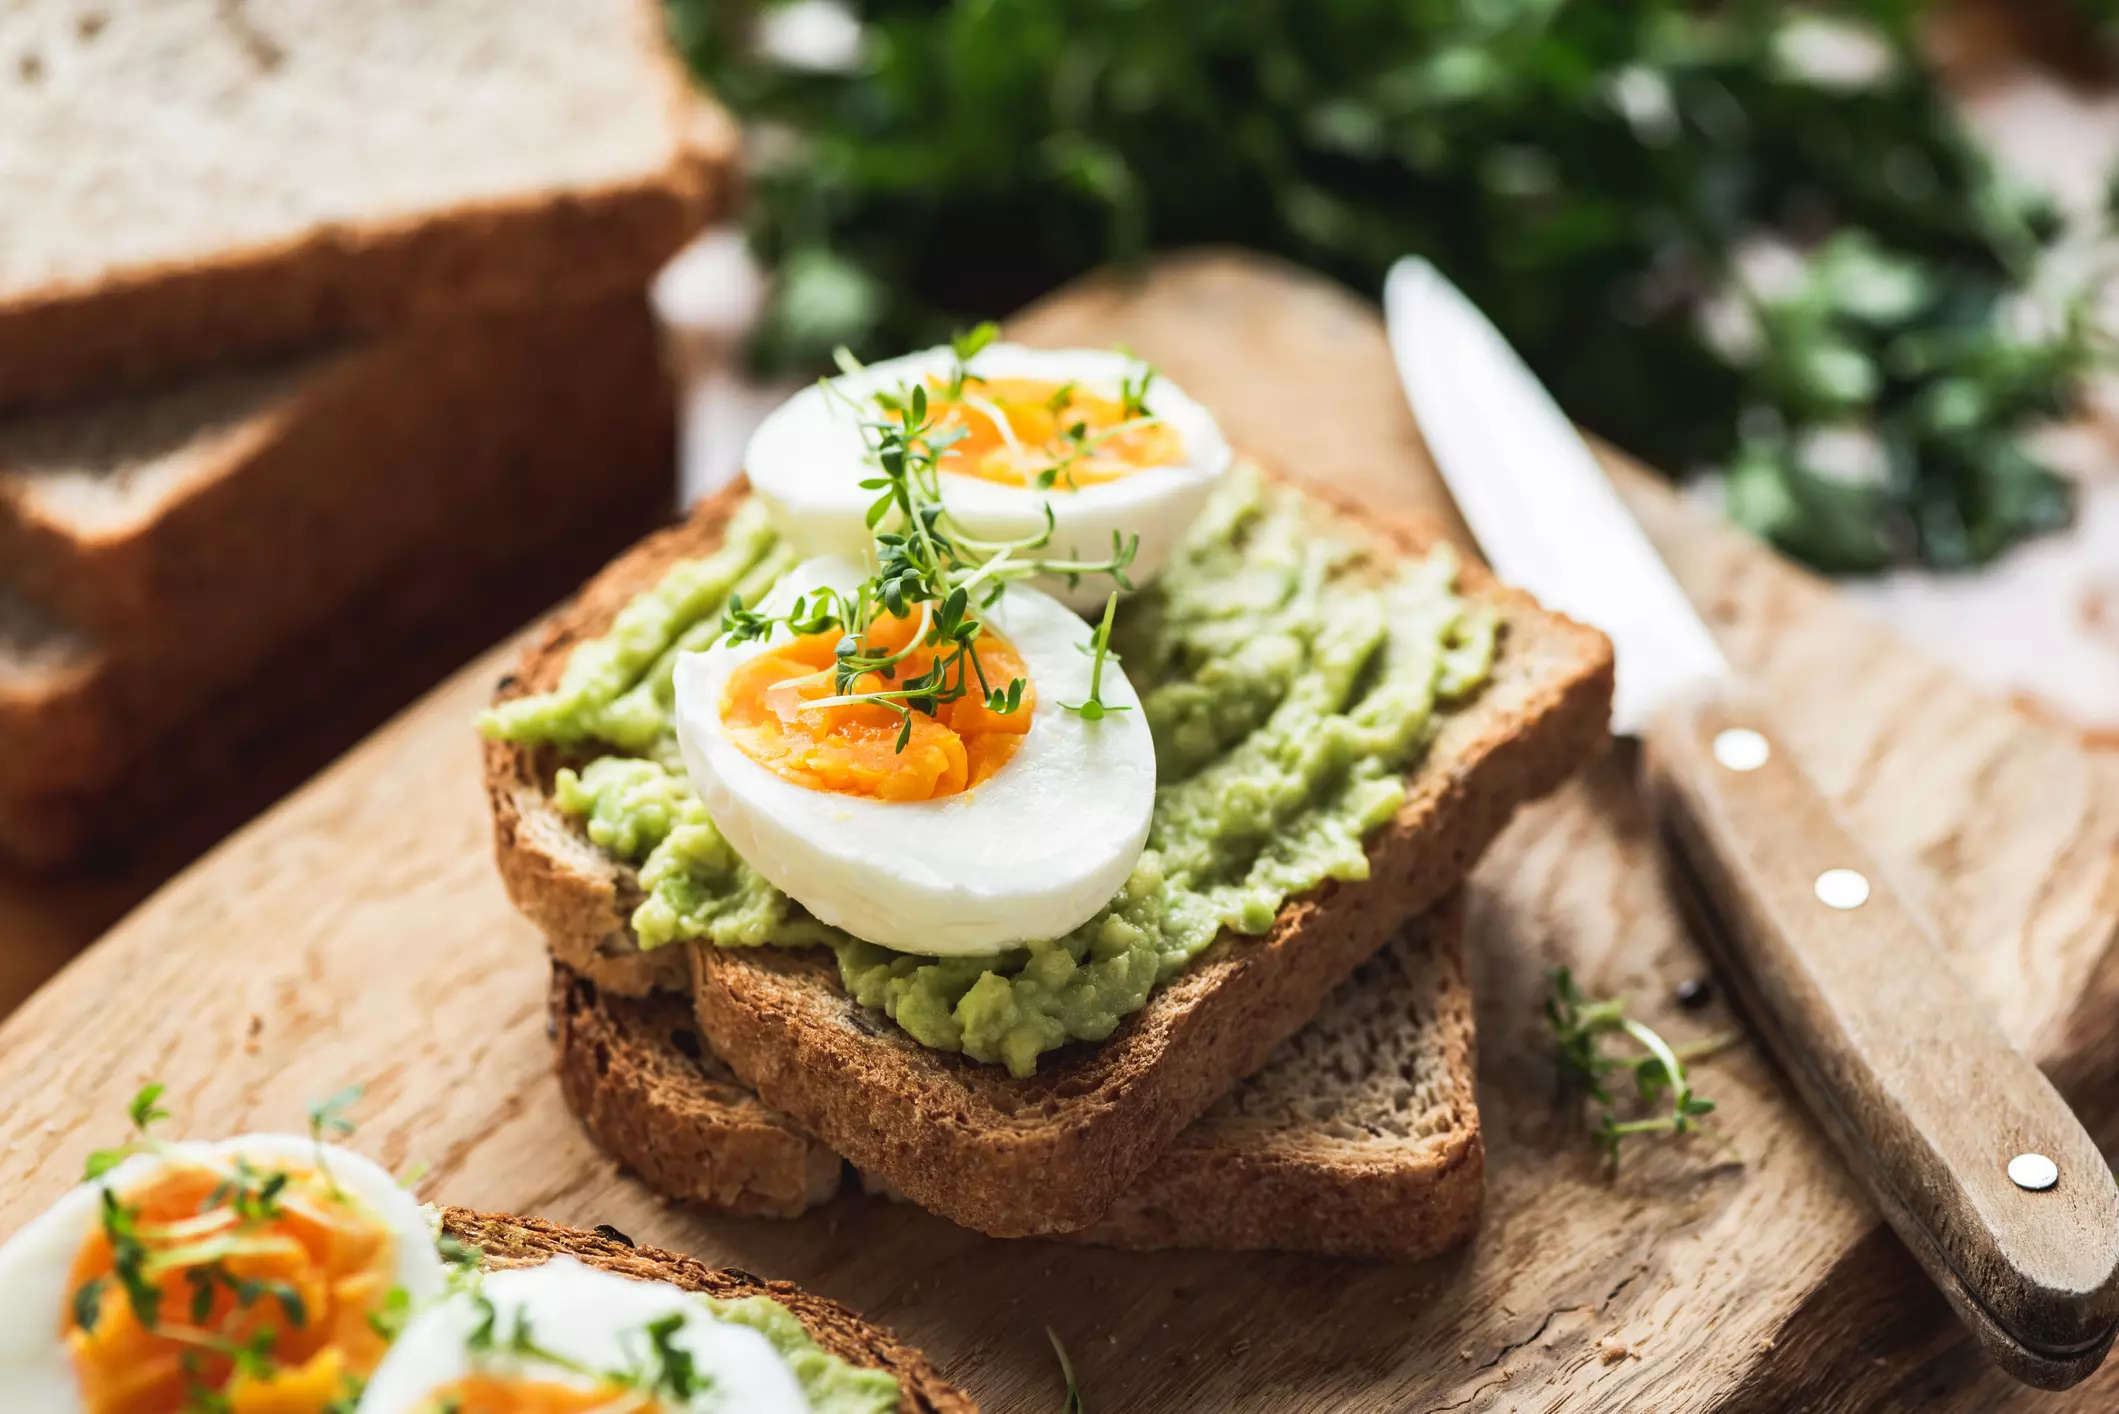 Doctors say that in order to gain maximum benefits from the intake of eggs, it is important to pair them with the right foods. Try cooking them in olive oil and enjoy with a side of avocados, whole-grain toast and a few roasted vegetables.